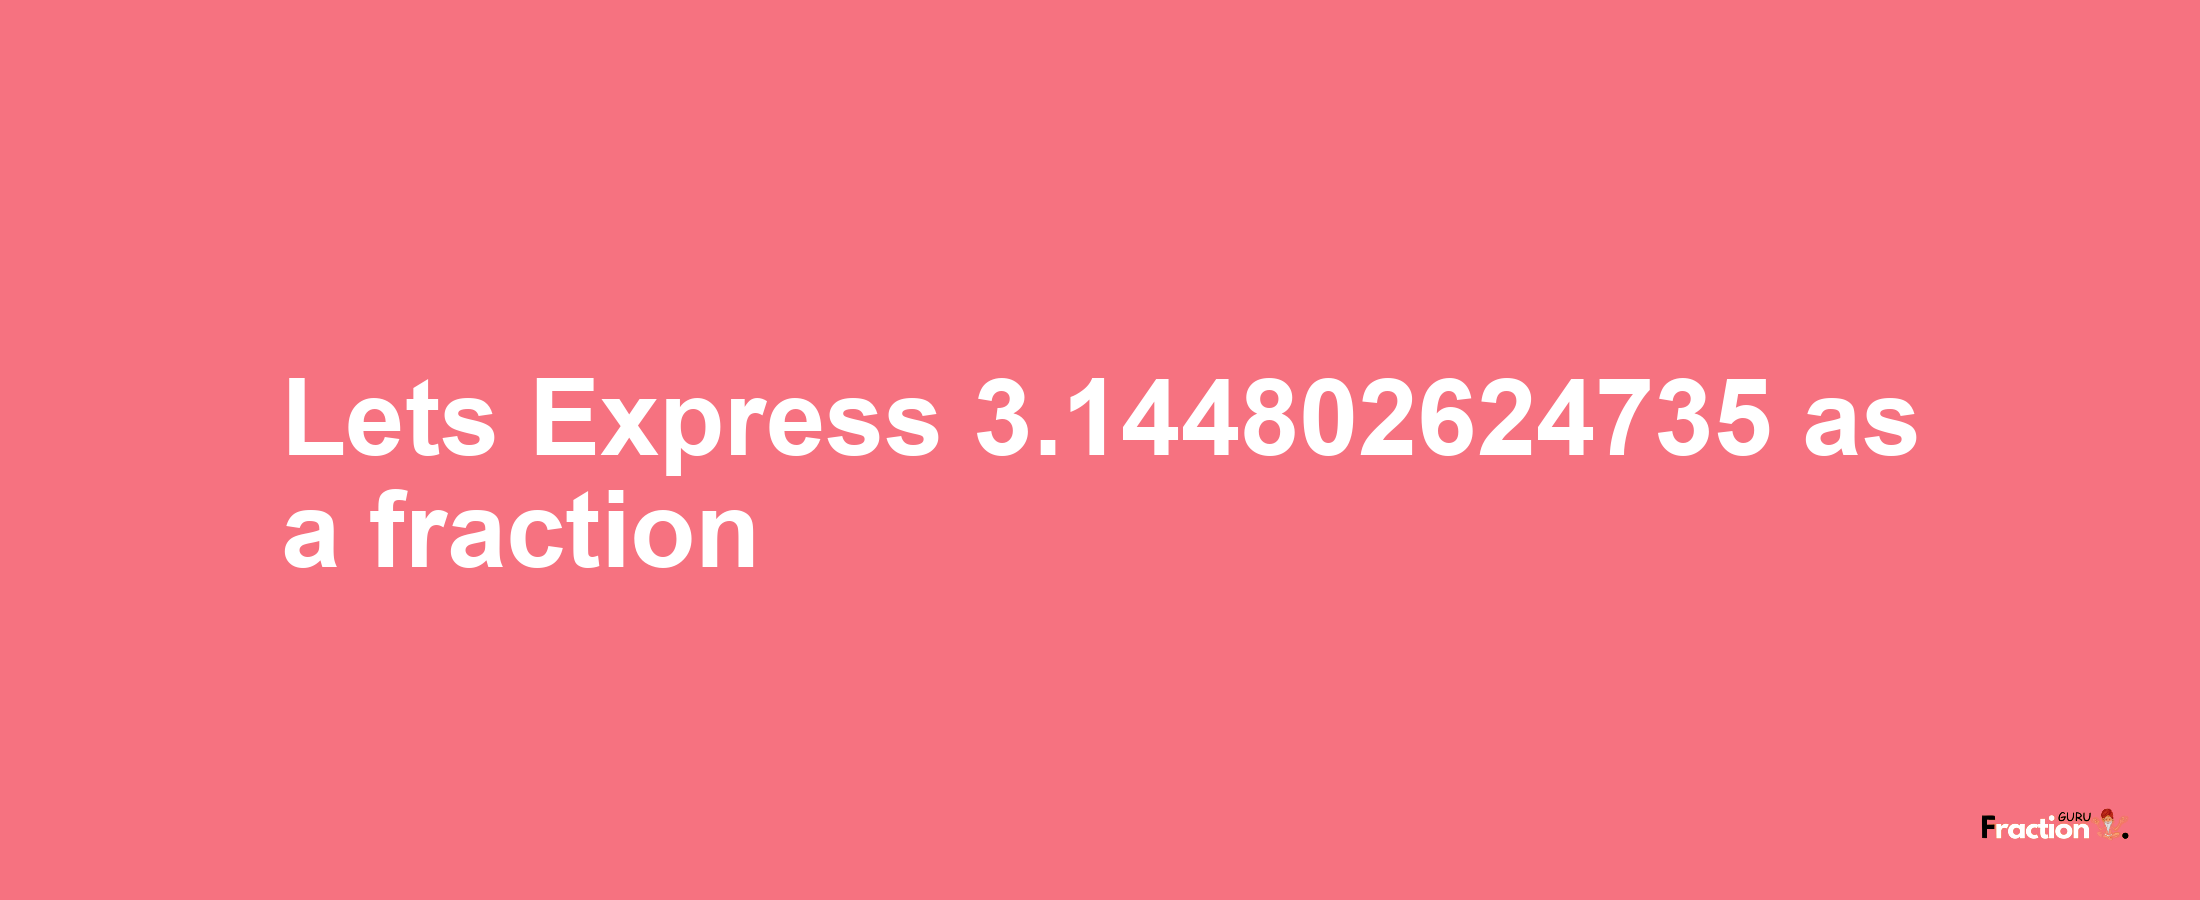 Lets Express 3.144802624735 as afraction